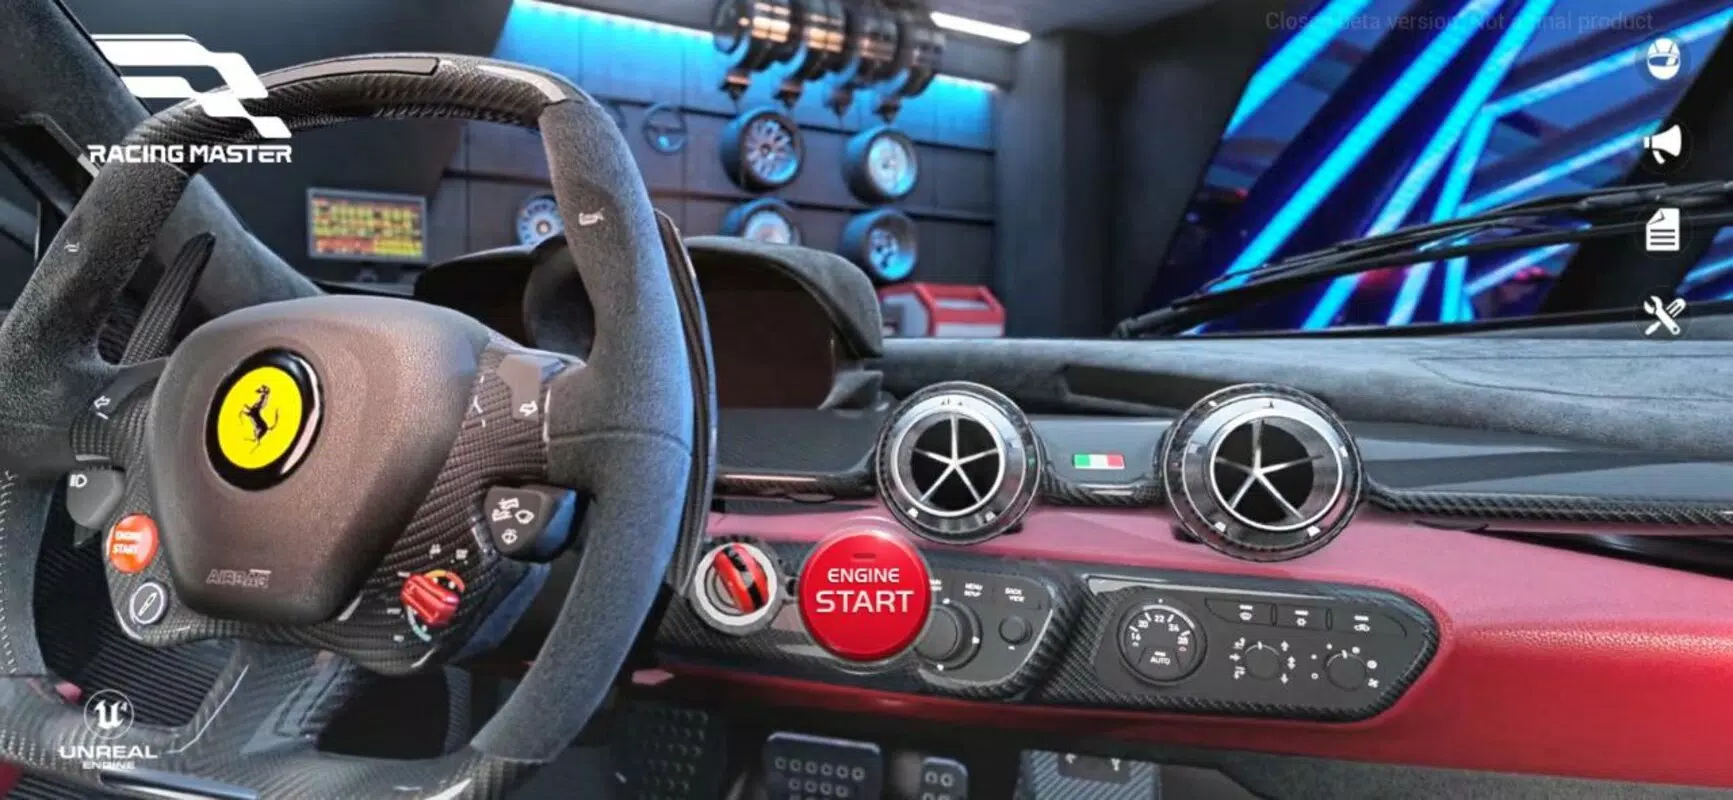 Racing Master is the Latest Game from Codemasters Headed to iOS and Android